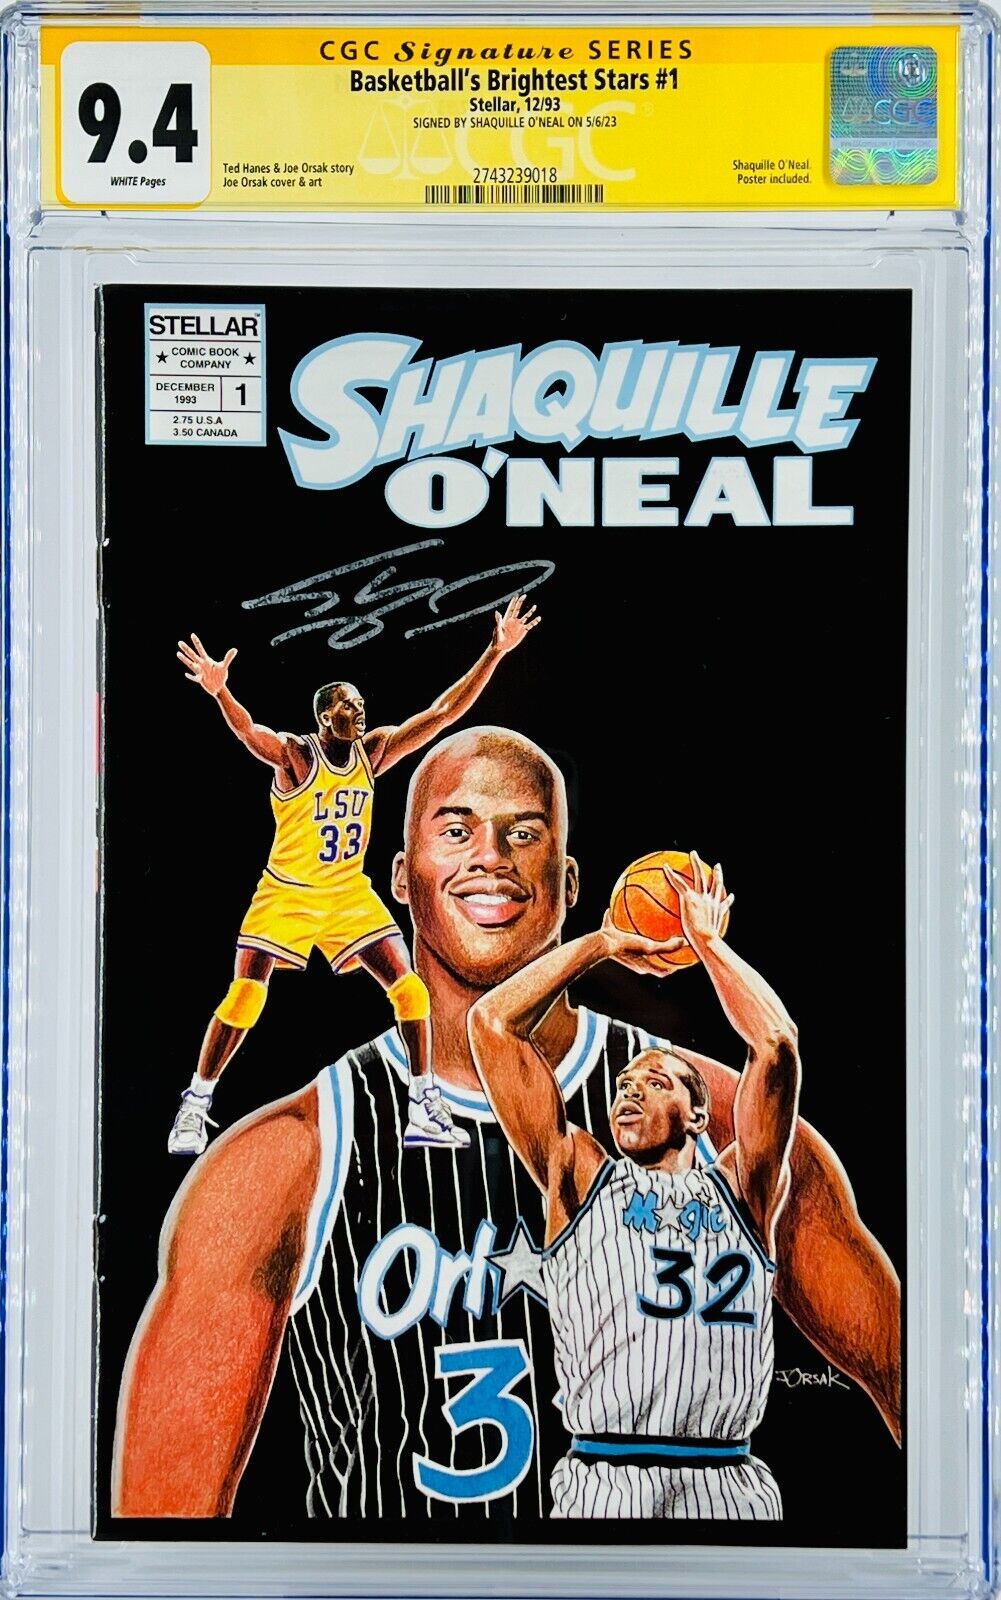 Shaquille O\'Neal Signed CGC SS Basketball\'s Brightest Stars #1 Stellar Grade 9.4